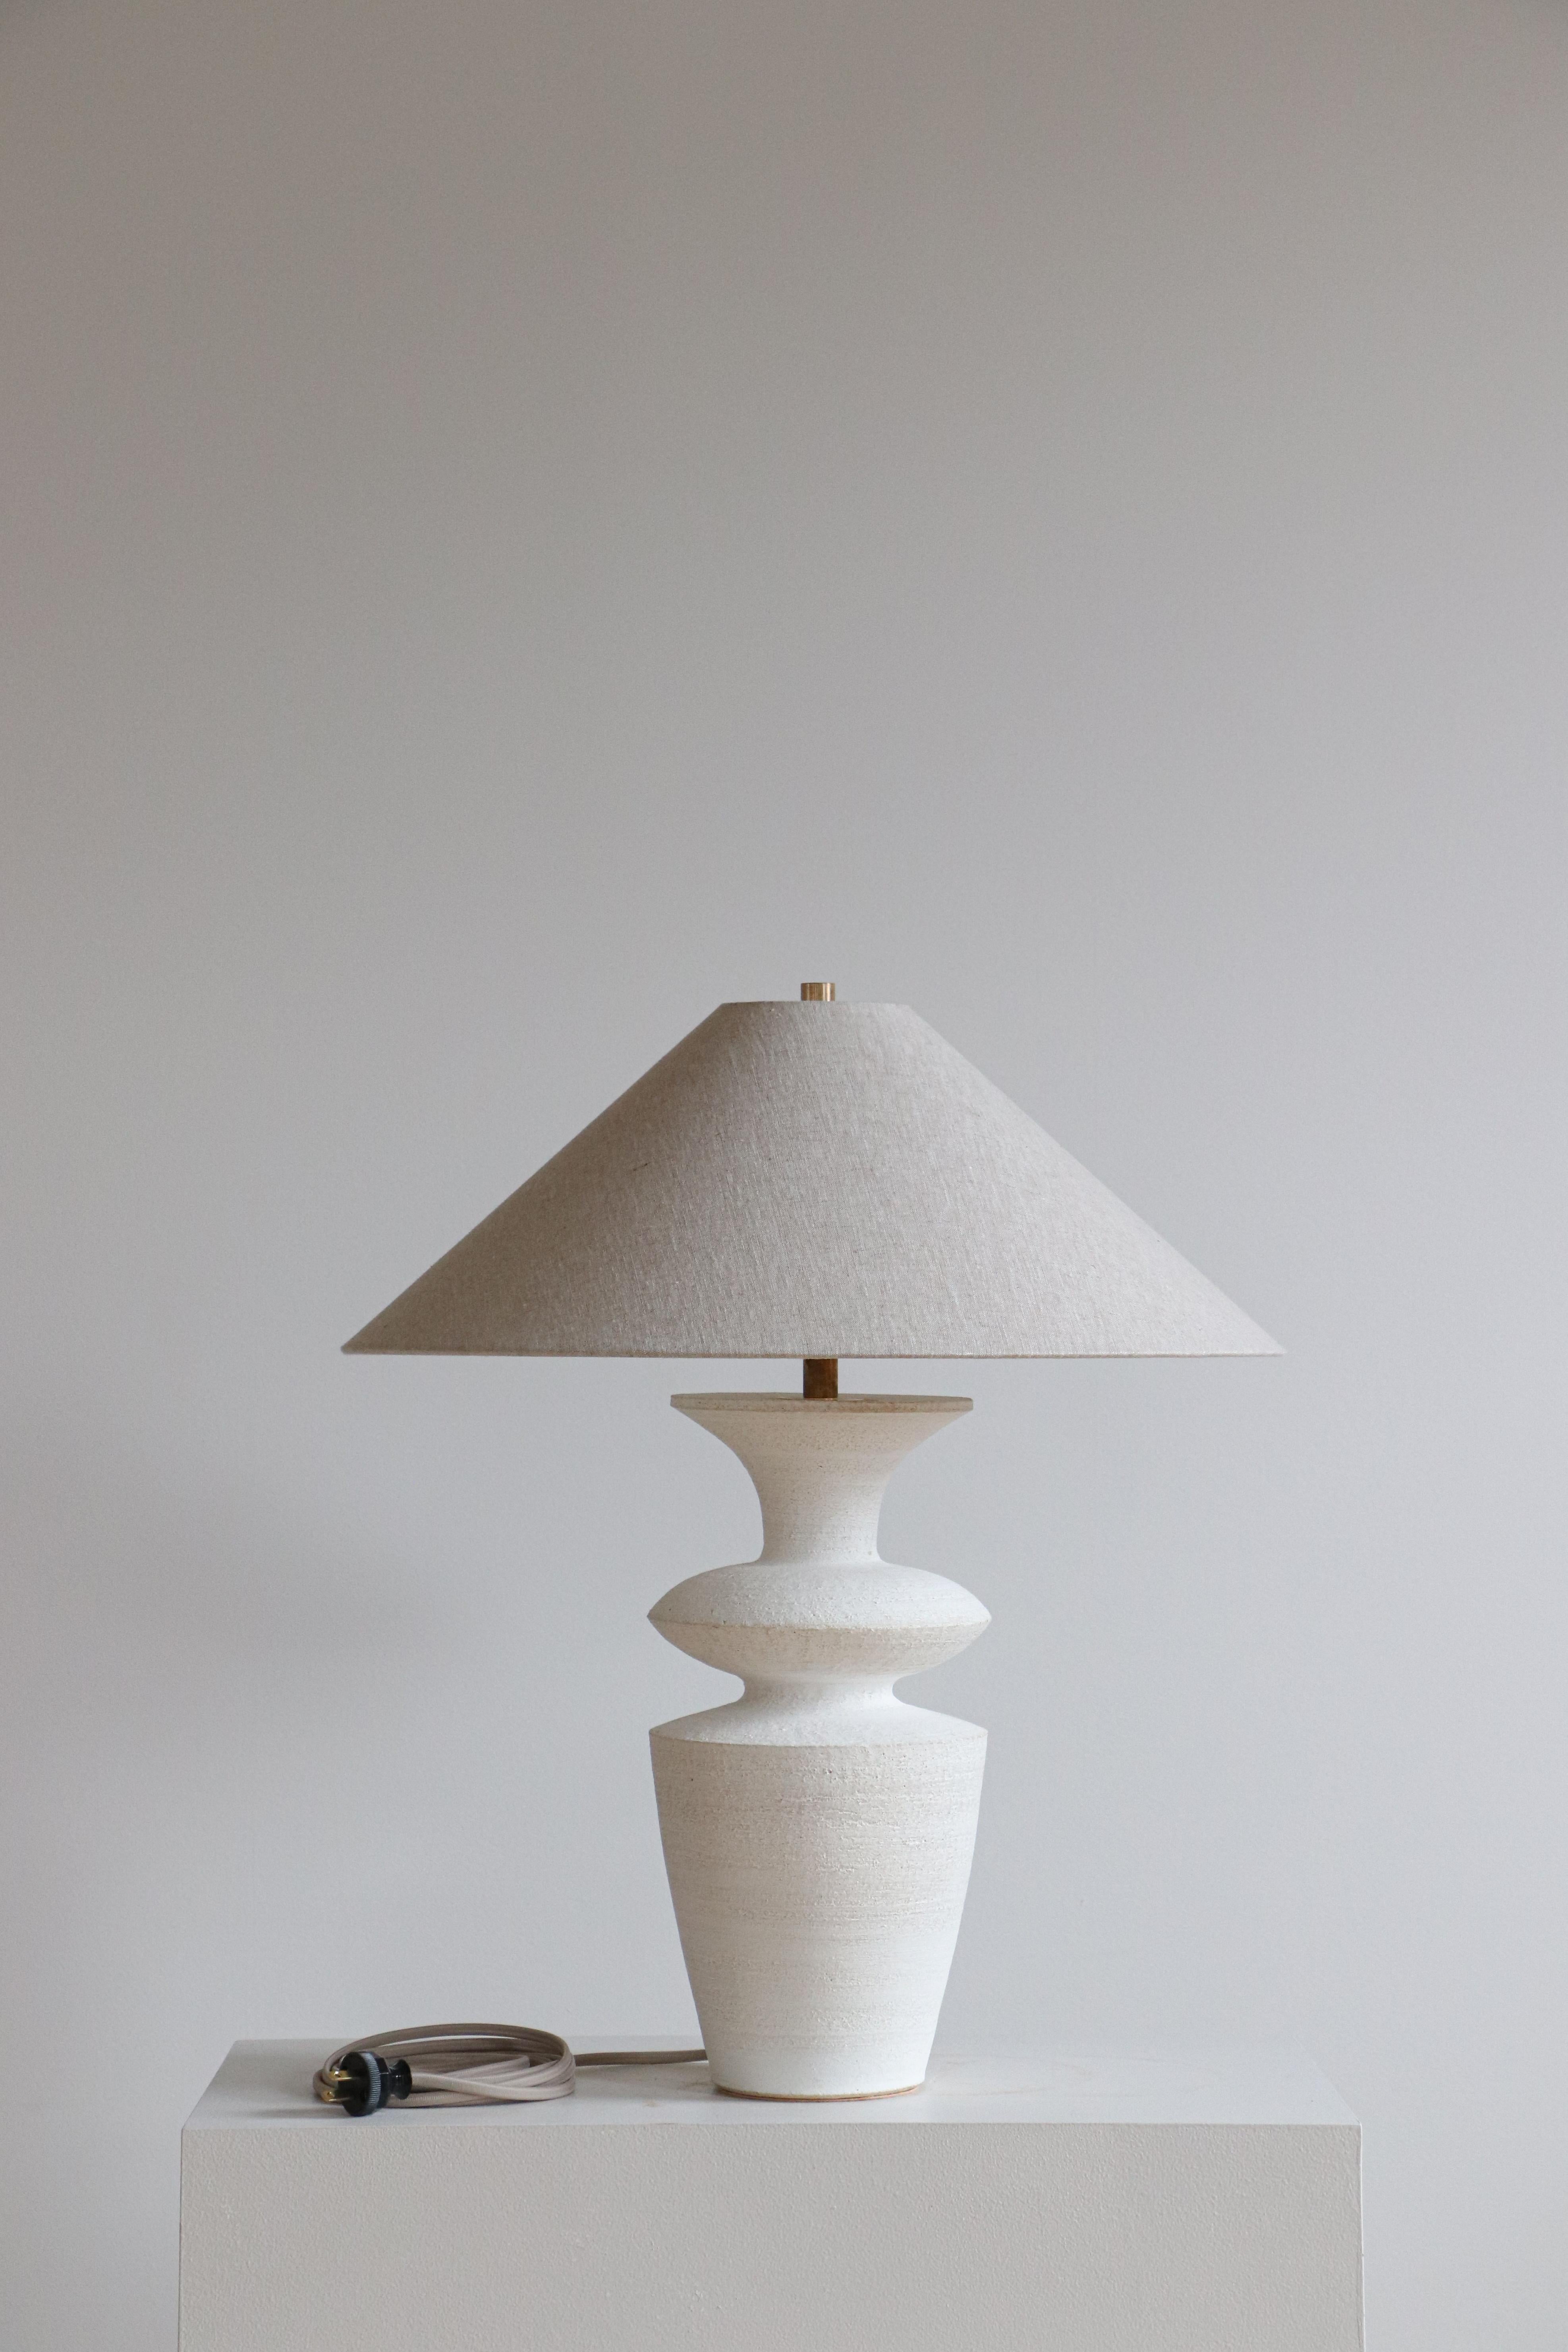 Terrasig Rhodes Table Lamp by Danny Kaplan Studio
Dimensions: ⌀ 51 x H 69 cm
Materials: Glazed Ceramic, Unfinished Brass, Linen

This item is handmade, and may exhibit variability within the same piece. We do our best to maintain a consistent